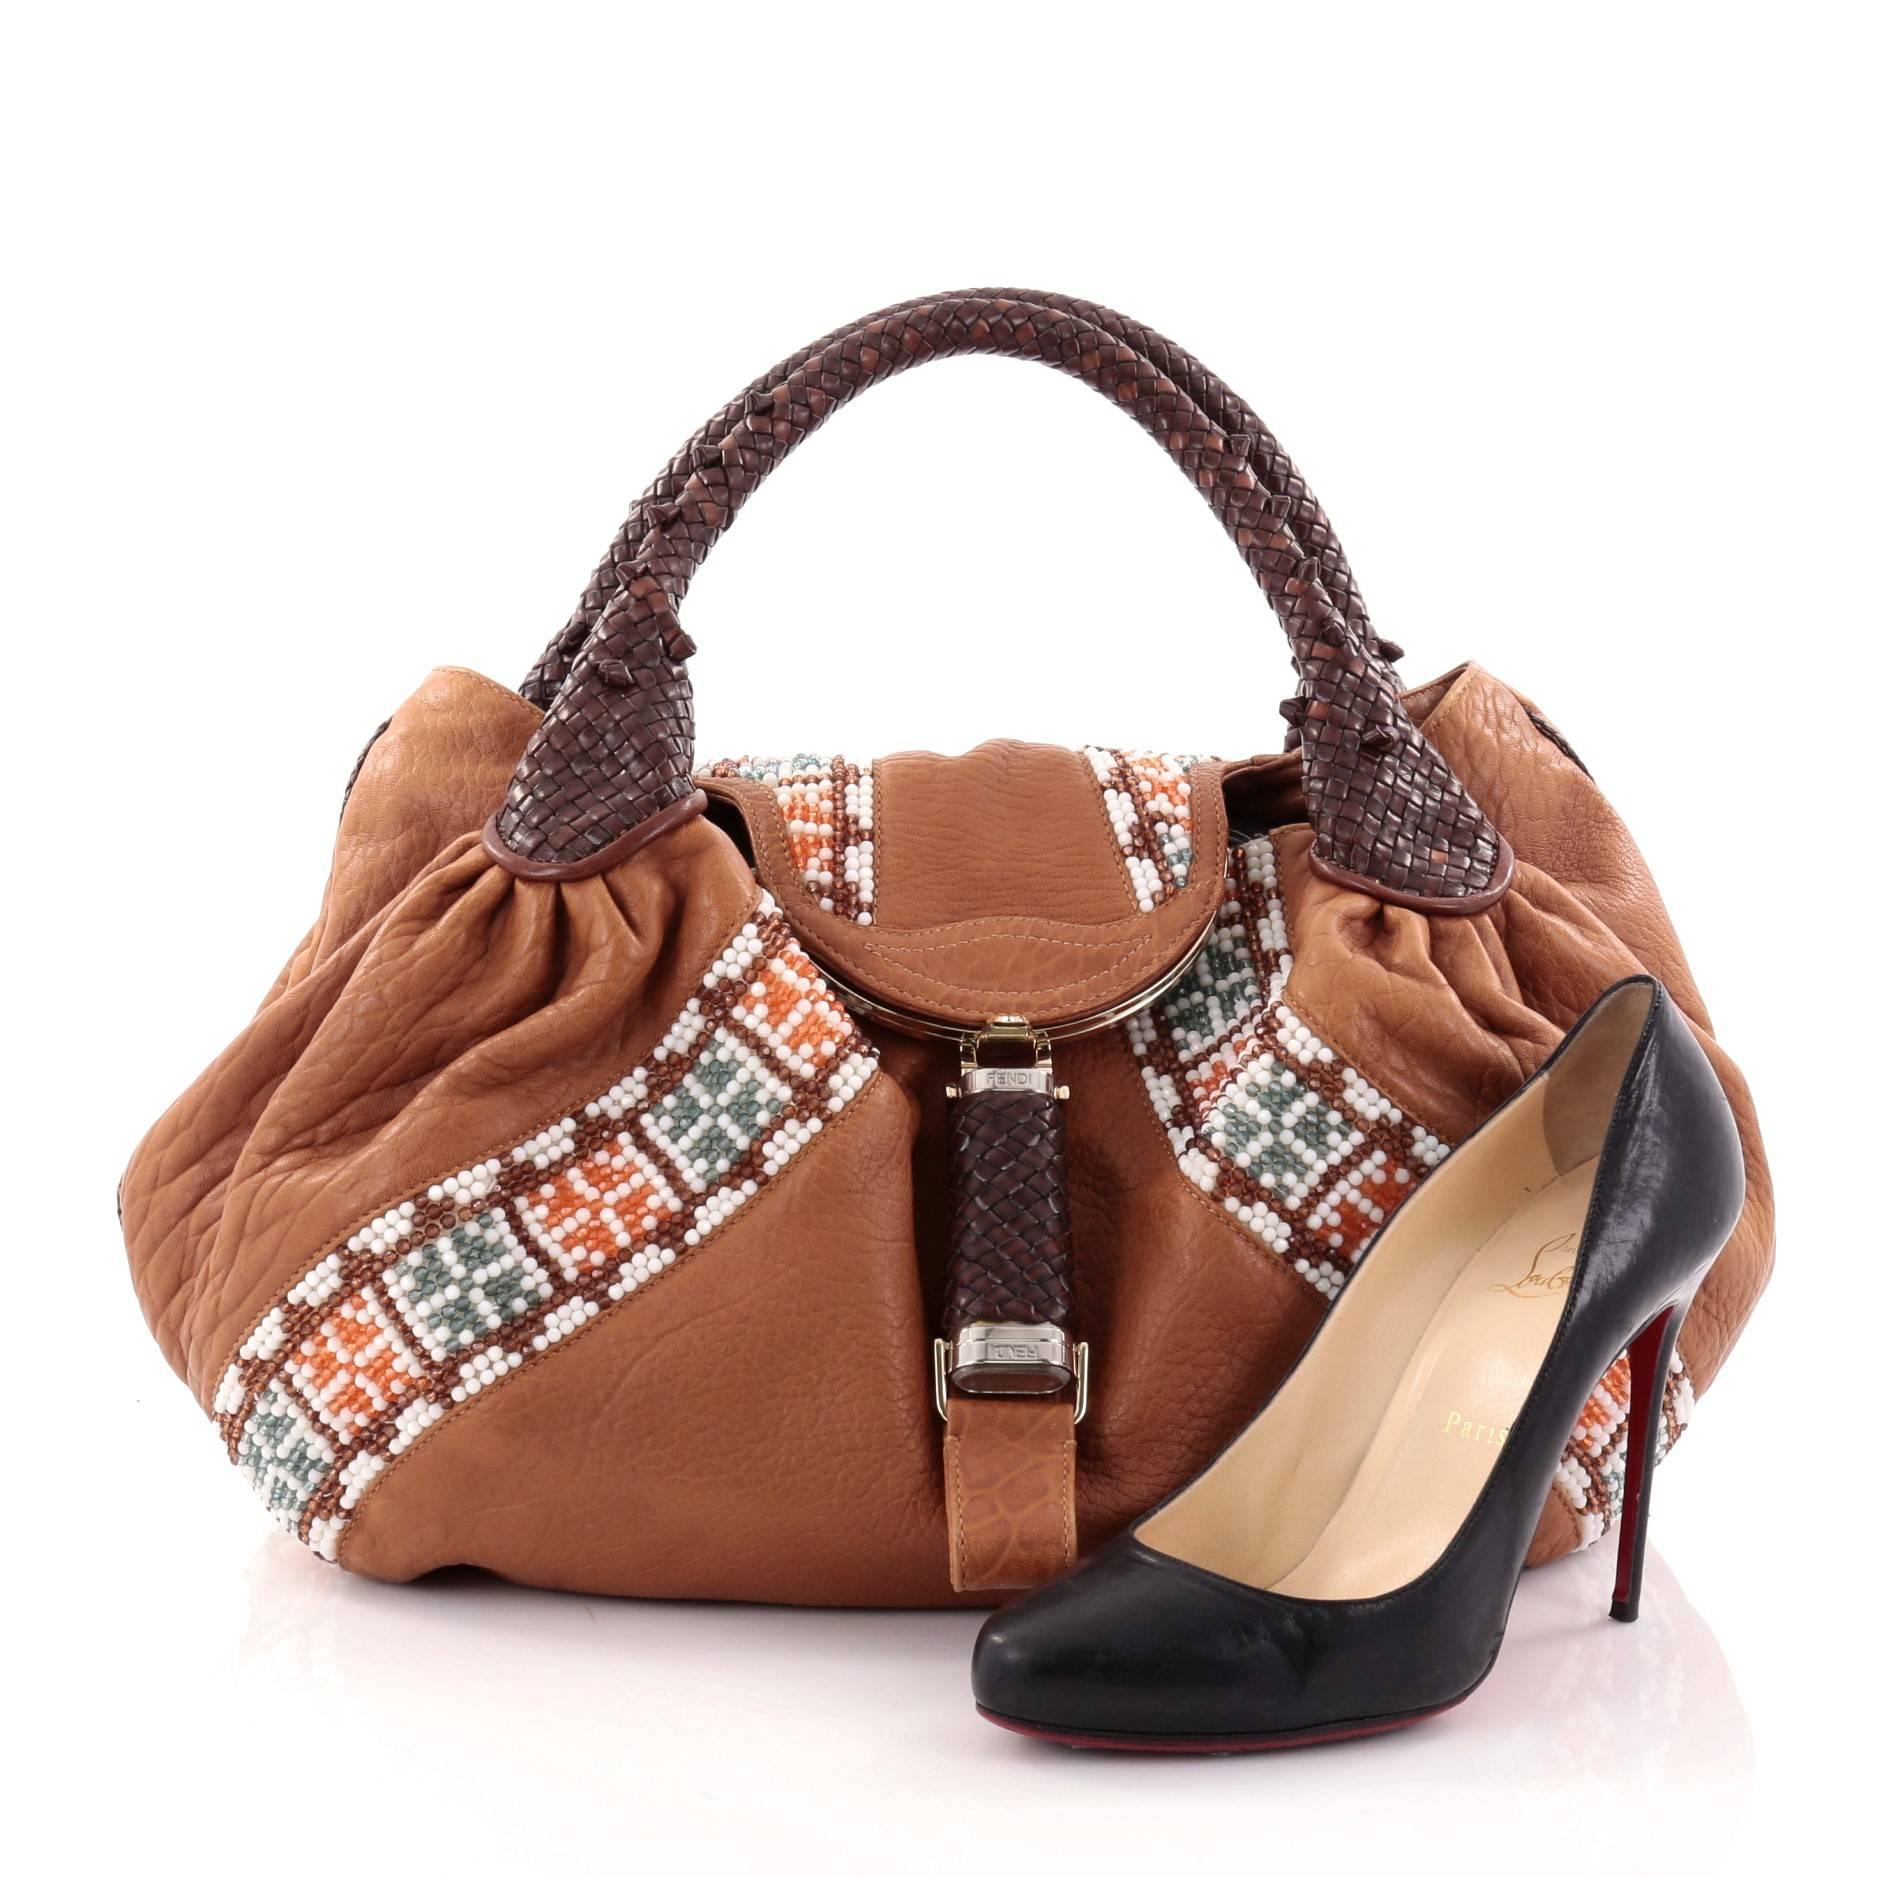 This authentic Fendi Spy Bag Beaded Leather showcases one of the brand's most popular designs. Constructed from rich brown leather with white, orange, blue and copper bead detailing, this alluring bag features spiked braided woven leather handles